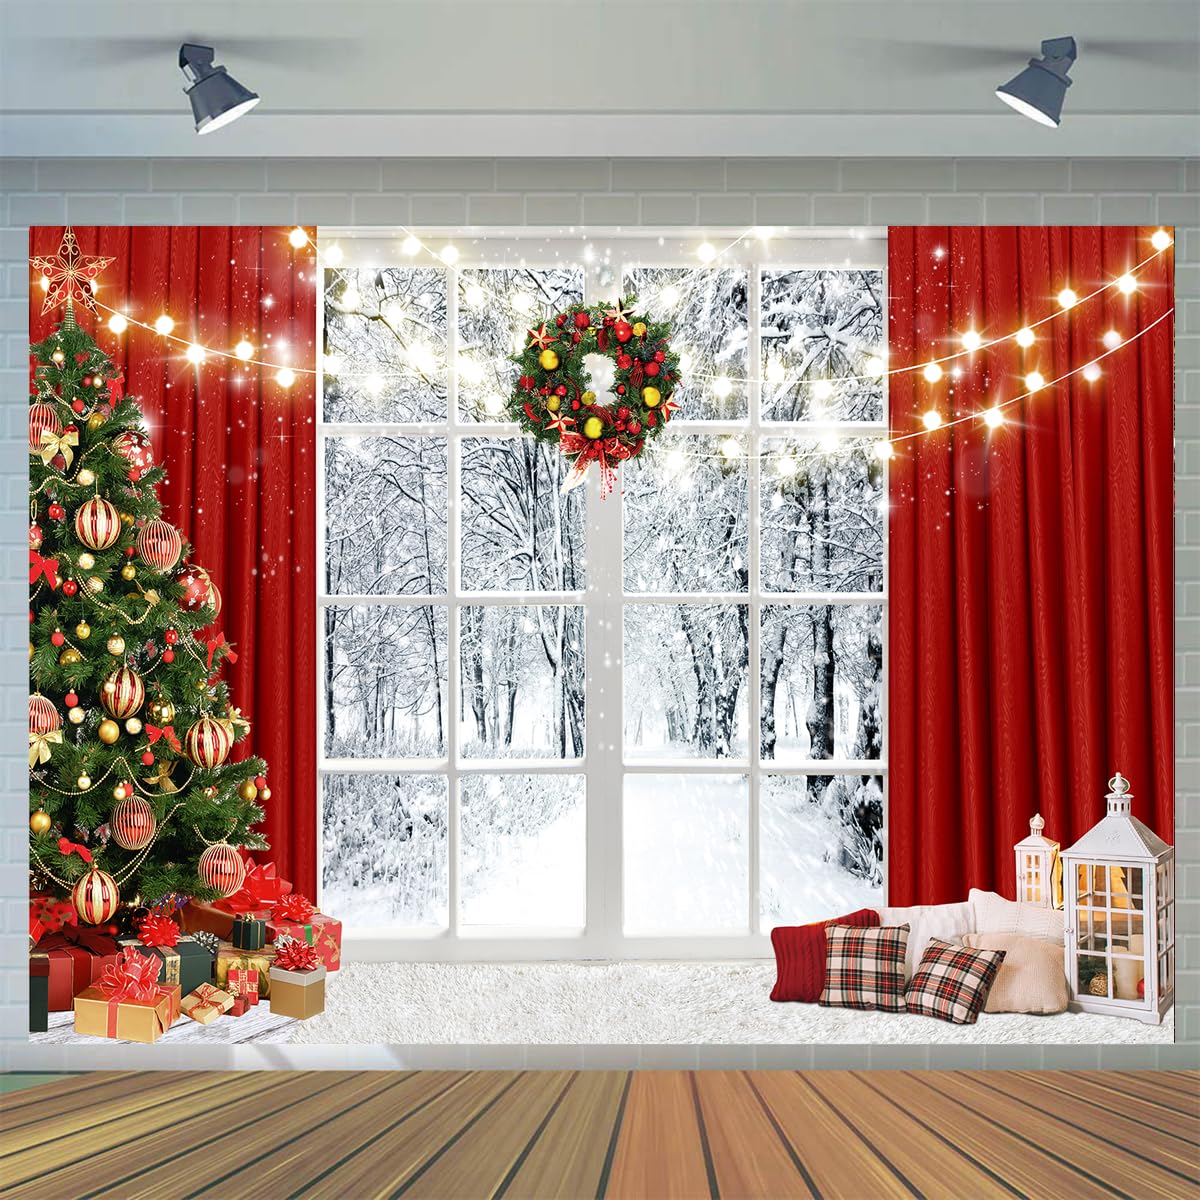 CYLYH 7x5ft Christmas Window Backdrop for Photography Winter Snow Scene Xmas Party Decorations Background Christmas Festival Party Banner Backdrop D586